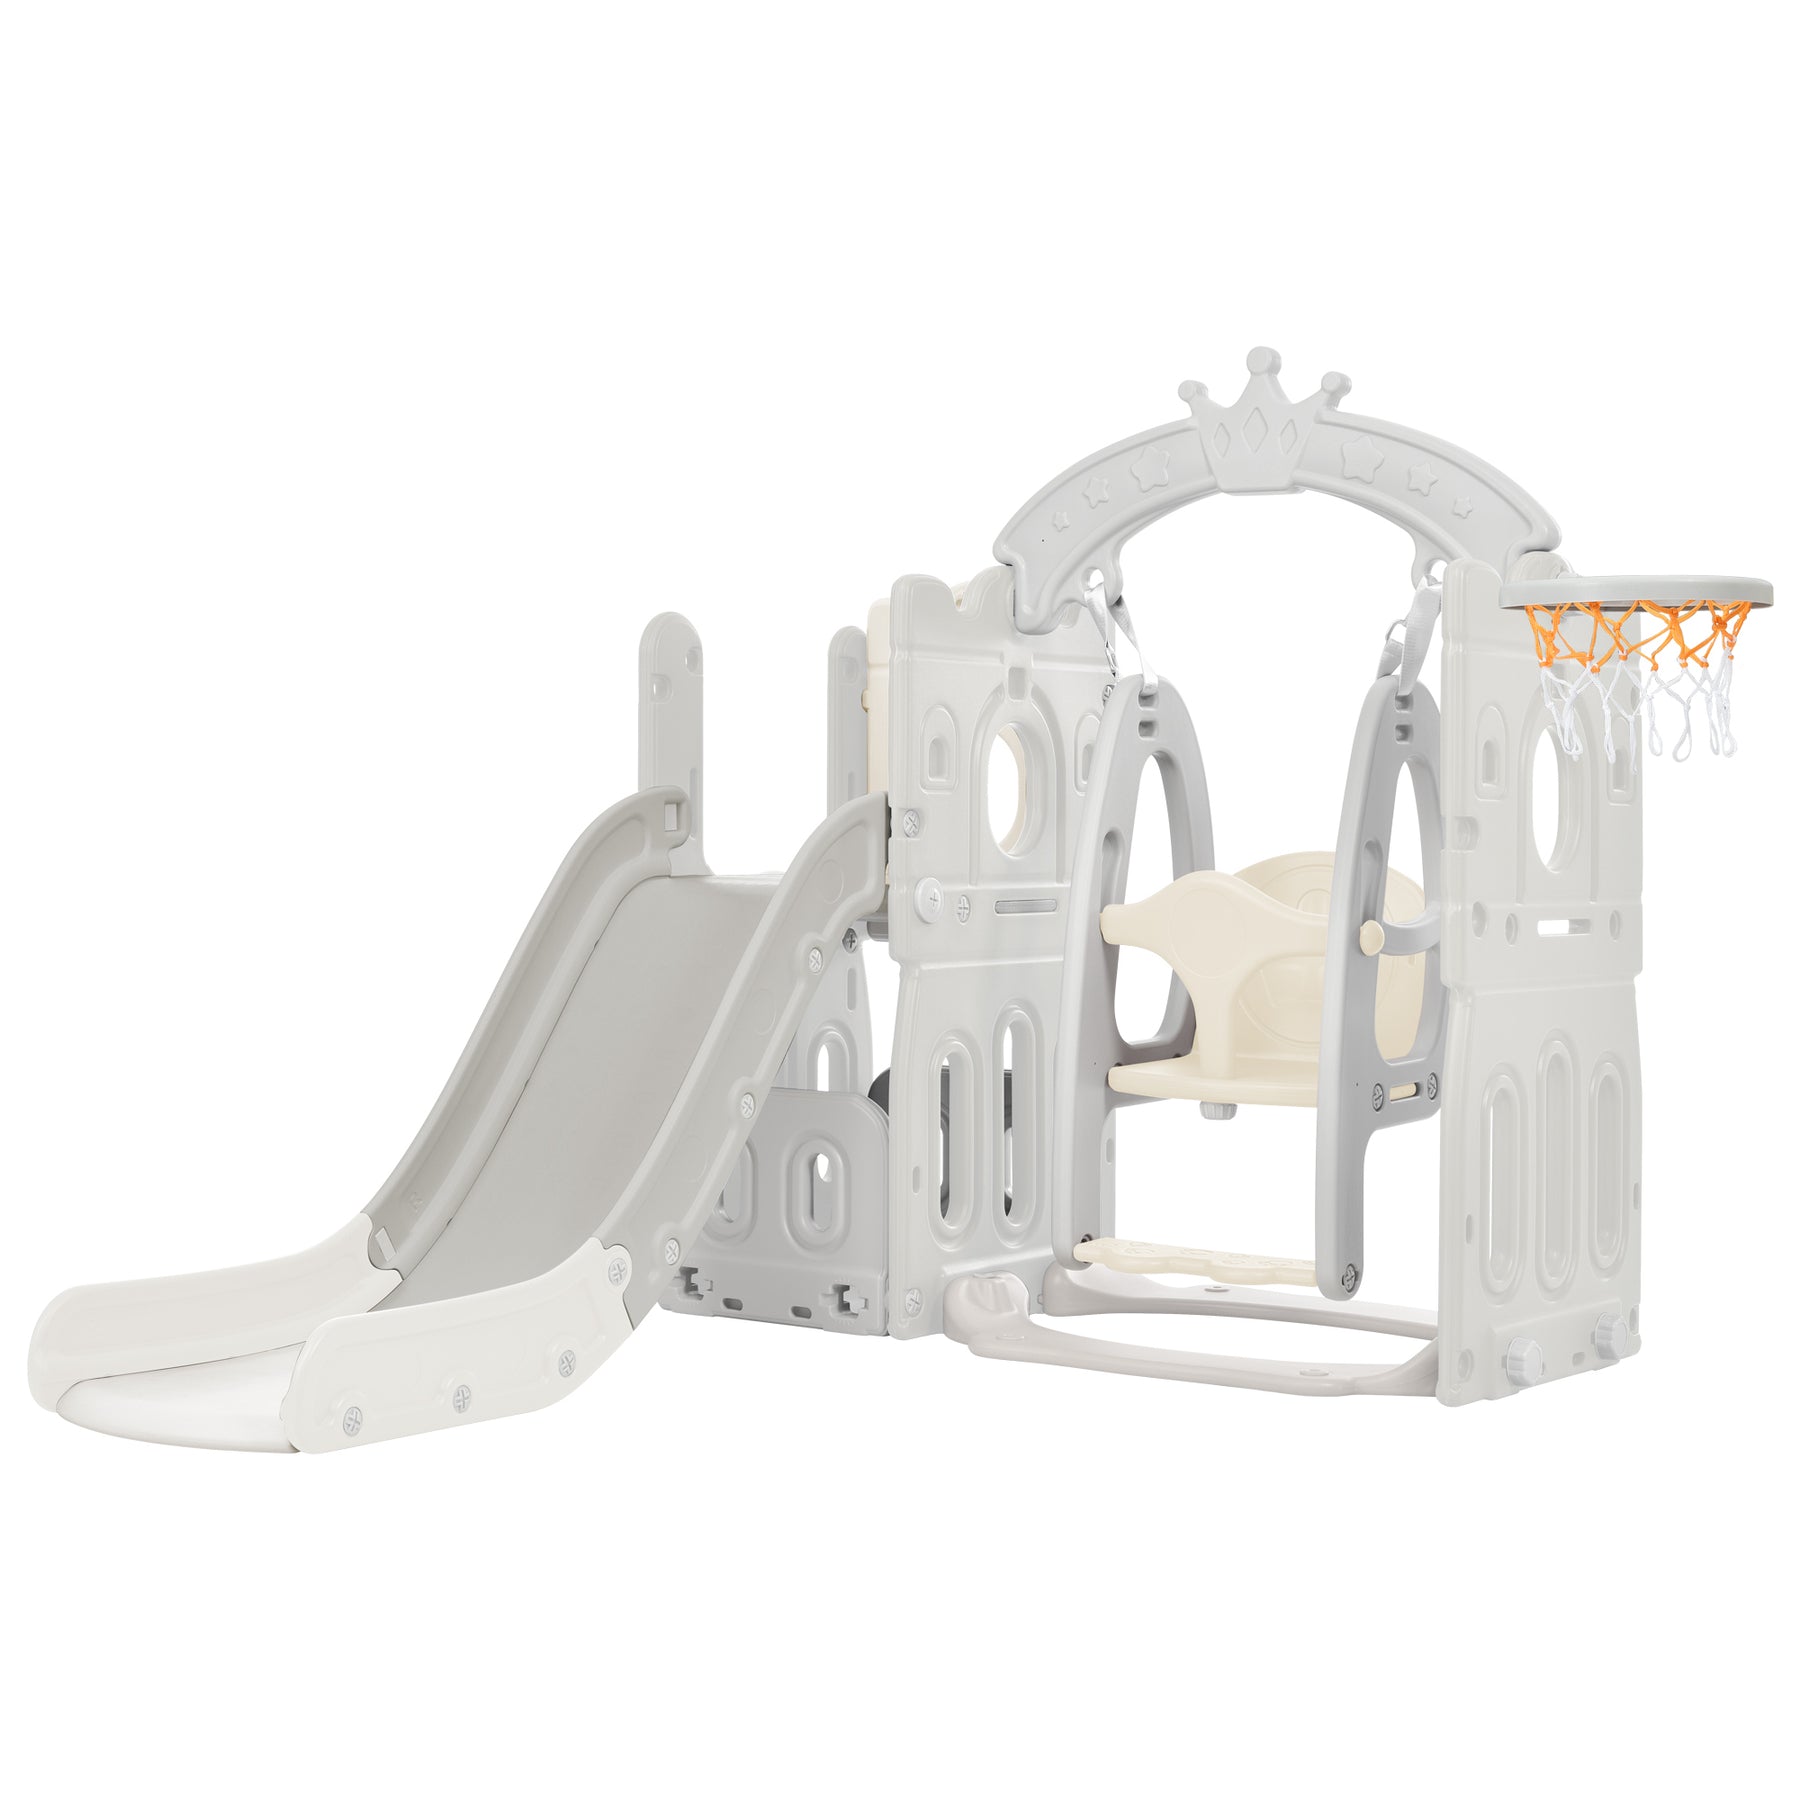 Toddler Slide and Swing Set 5 in 1, Kids Playground Climber Slide Playset with Basketball Hoop Freestanding Combination for Babies Indoor & Outdoor - Tonkn